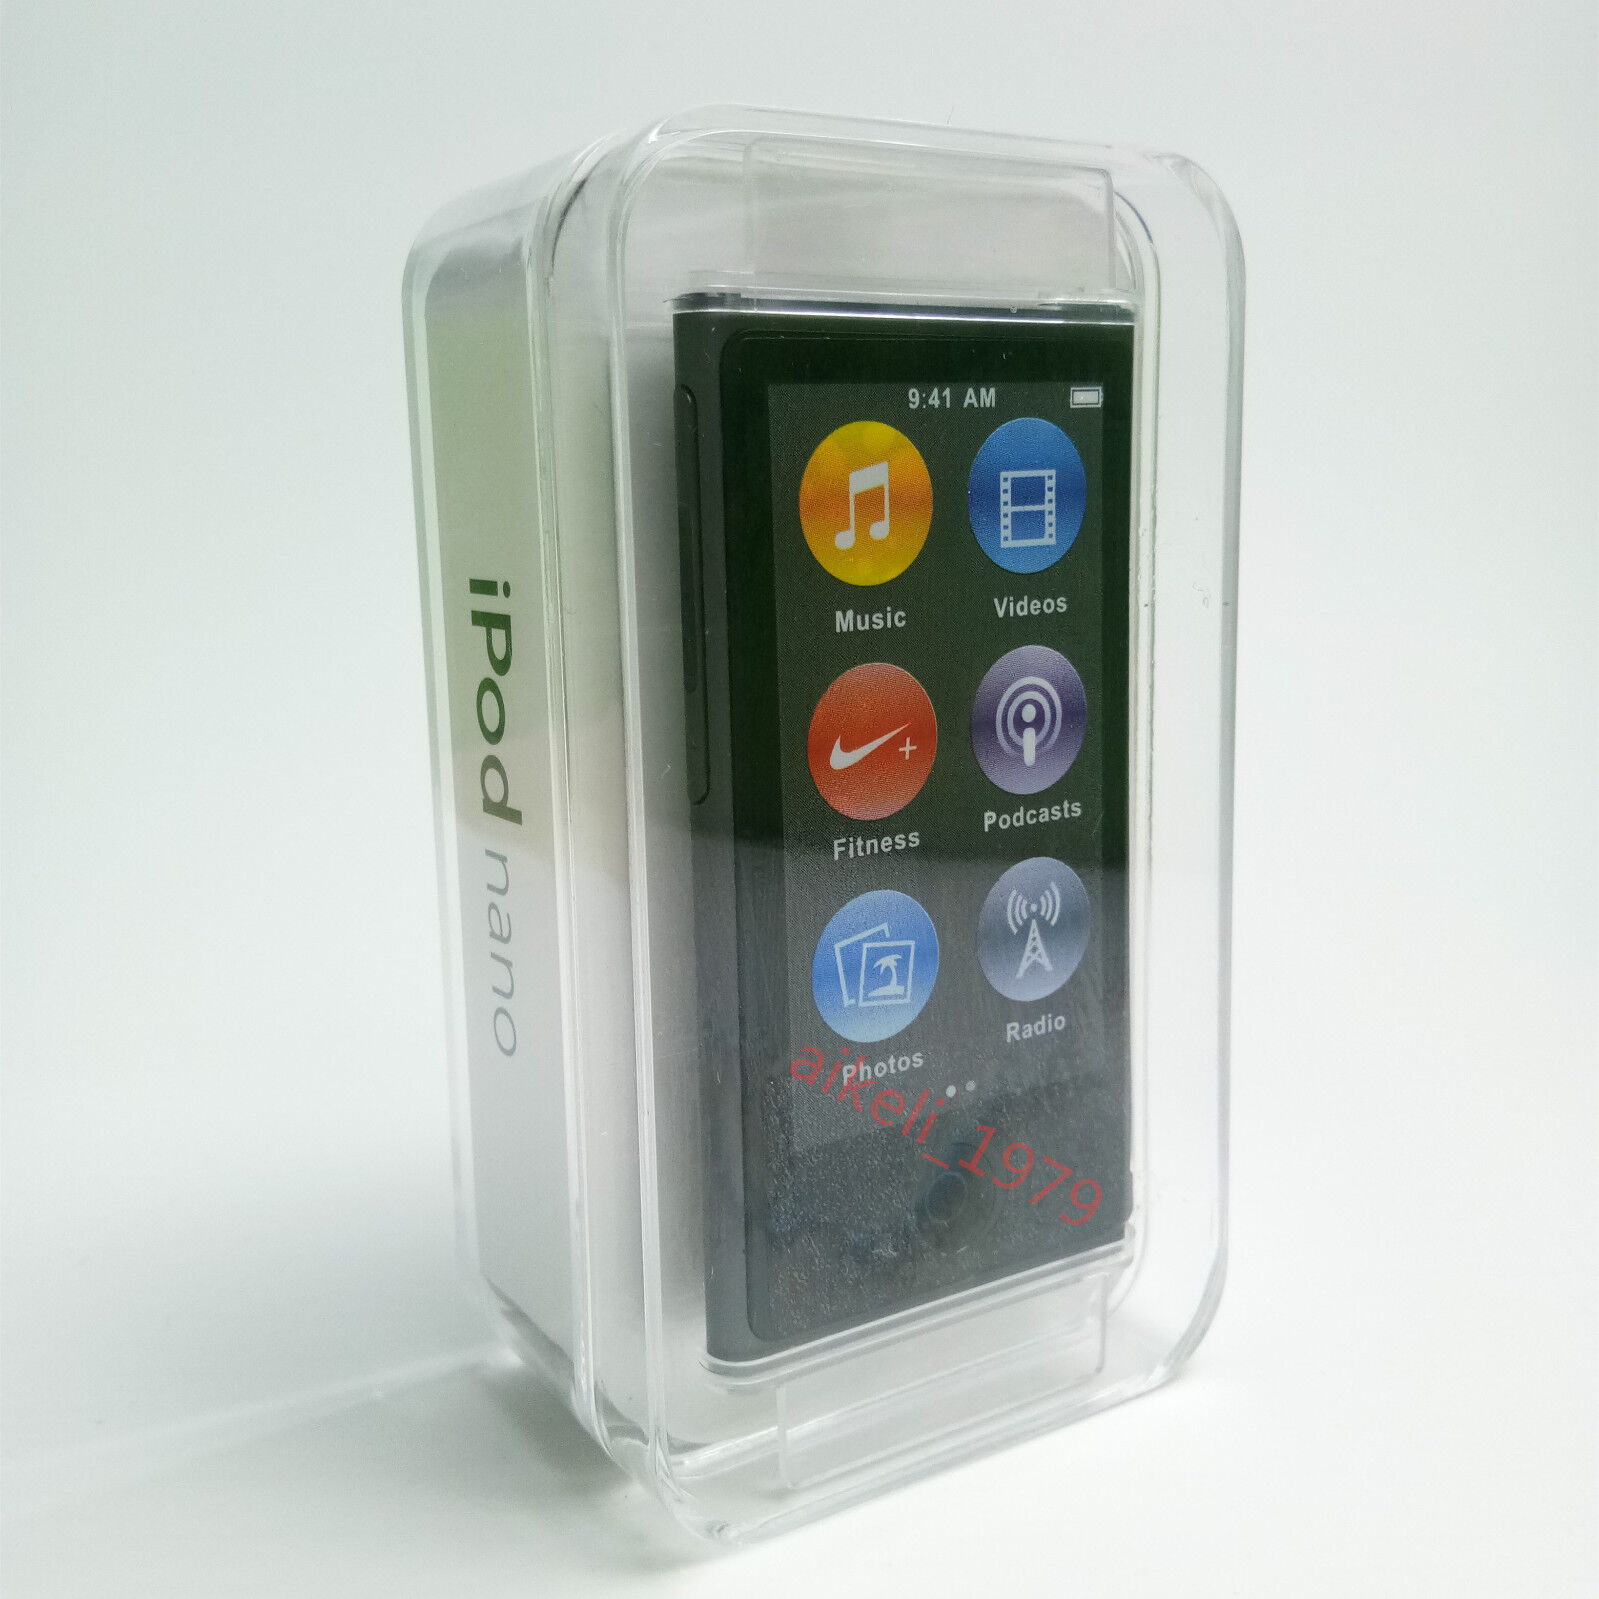 Apple iPod nano 7th Generation Space Gray (16 GB) for sale online 